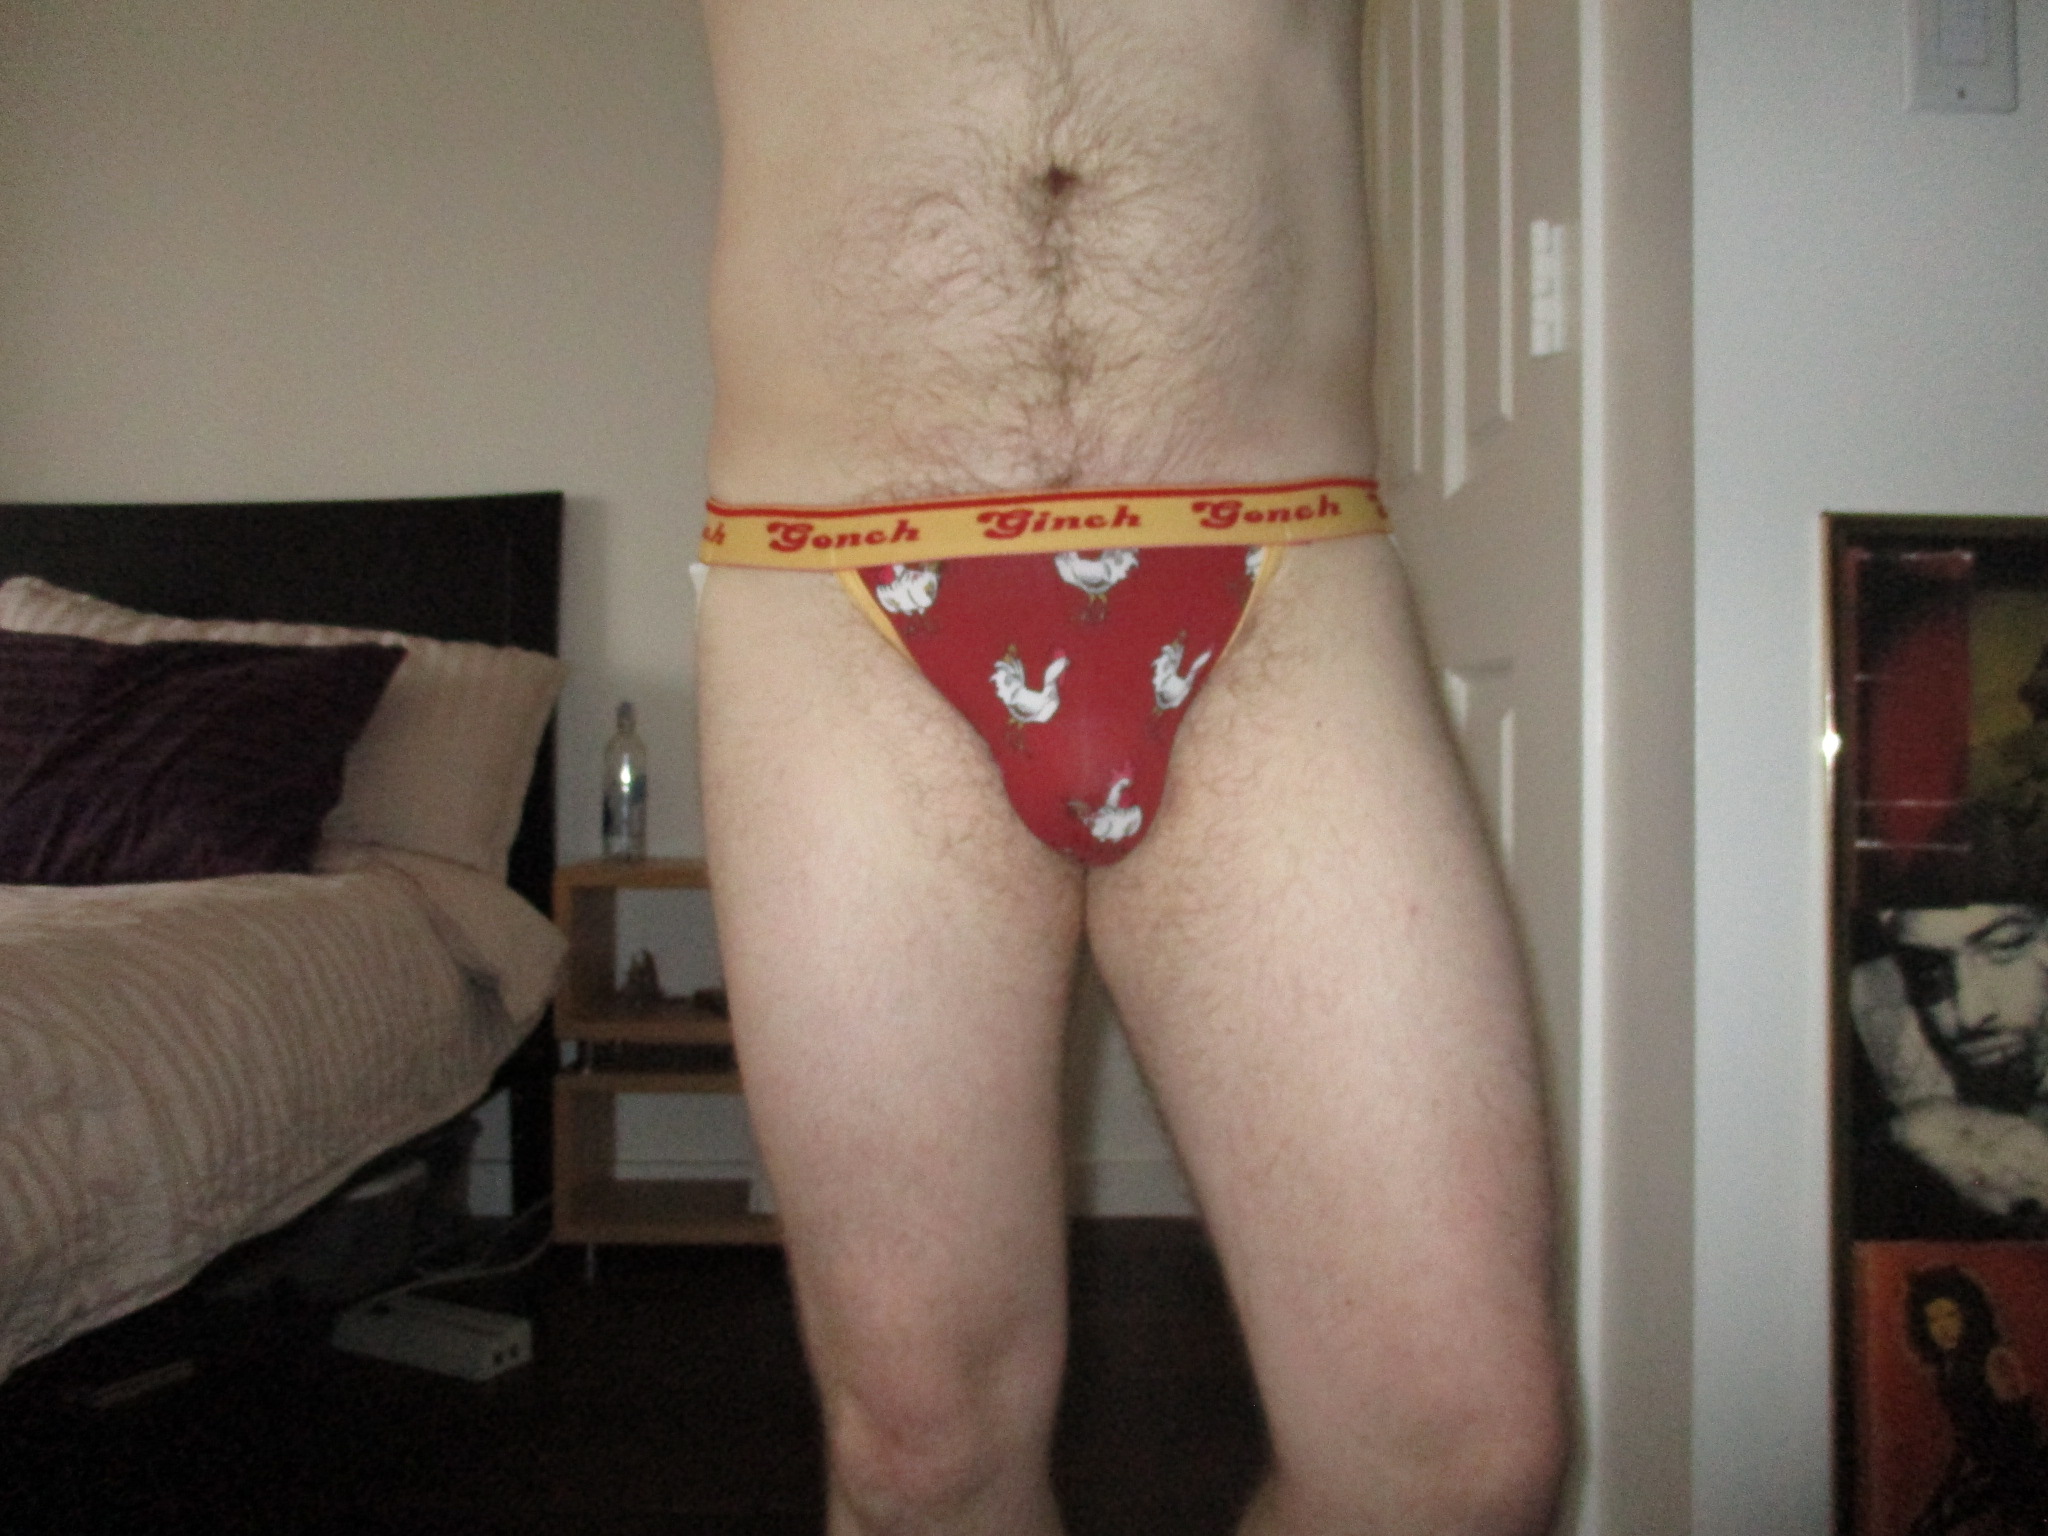 Wanna see my cock in this Ginch Gonch jock??